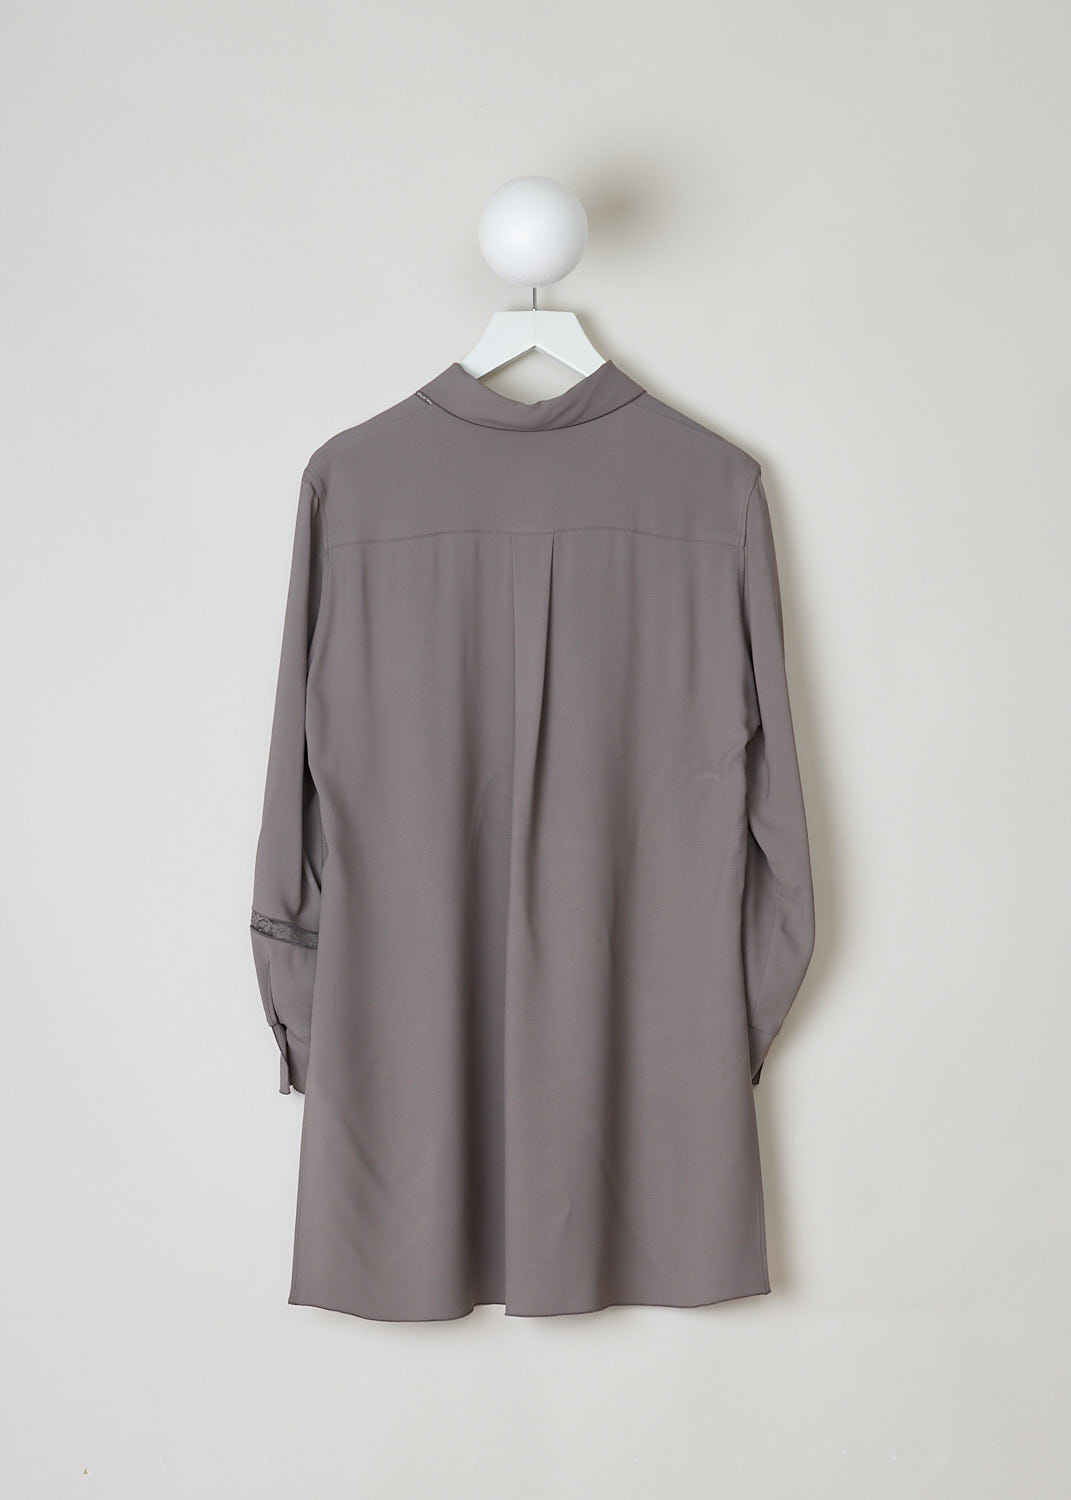 CHLOÃ‰, ANTHRACITE BLOUSE WITH LACE DETAILING, CHC21UHT09030048, Grey, Back, This long sleeve anthracite blouse features a spearpoint collar, a single breast pocket and front button closure. The blouse has an asymmetrical finish, meaning the back is longer than the front. A noticeable feature of this model is the lace inlay throughout the blouse. In the back, a single box pleat can be found.  
